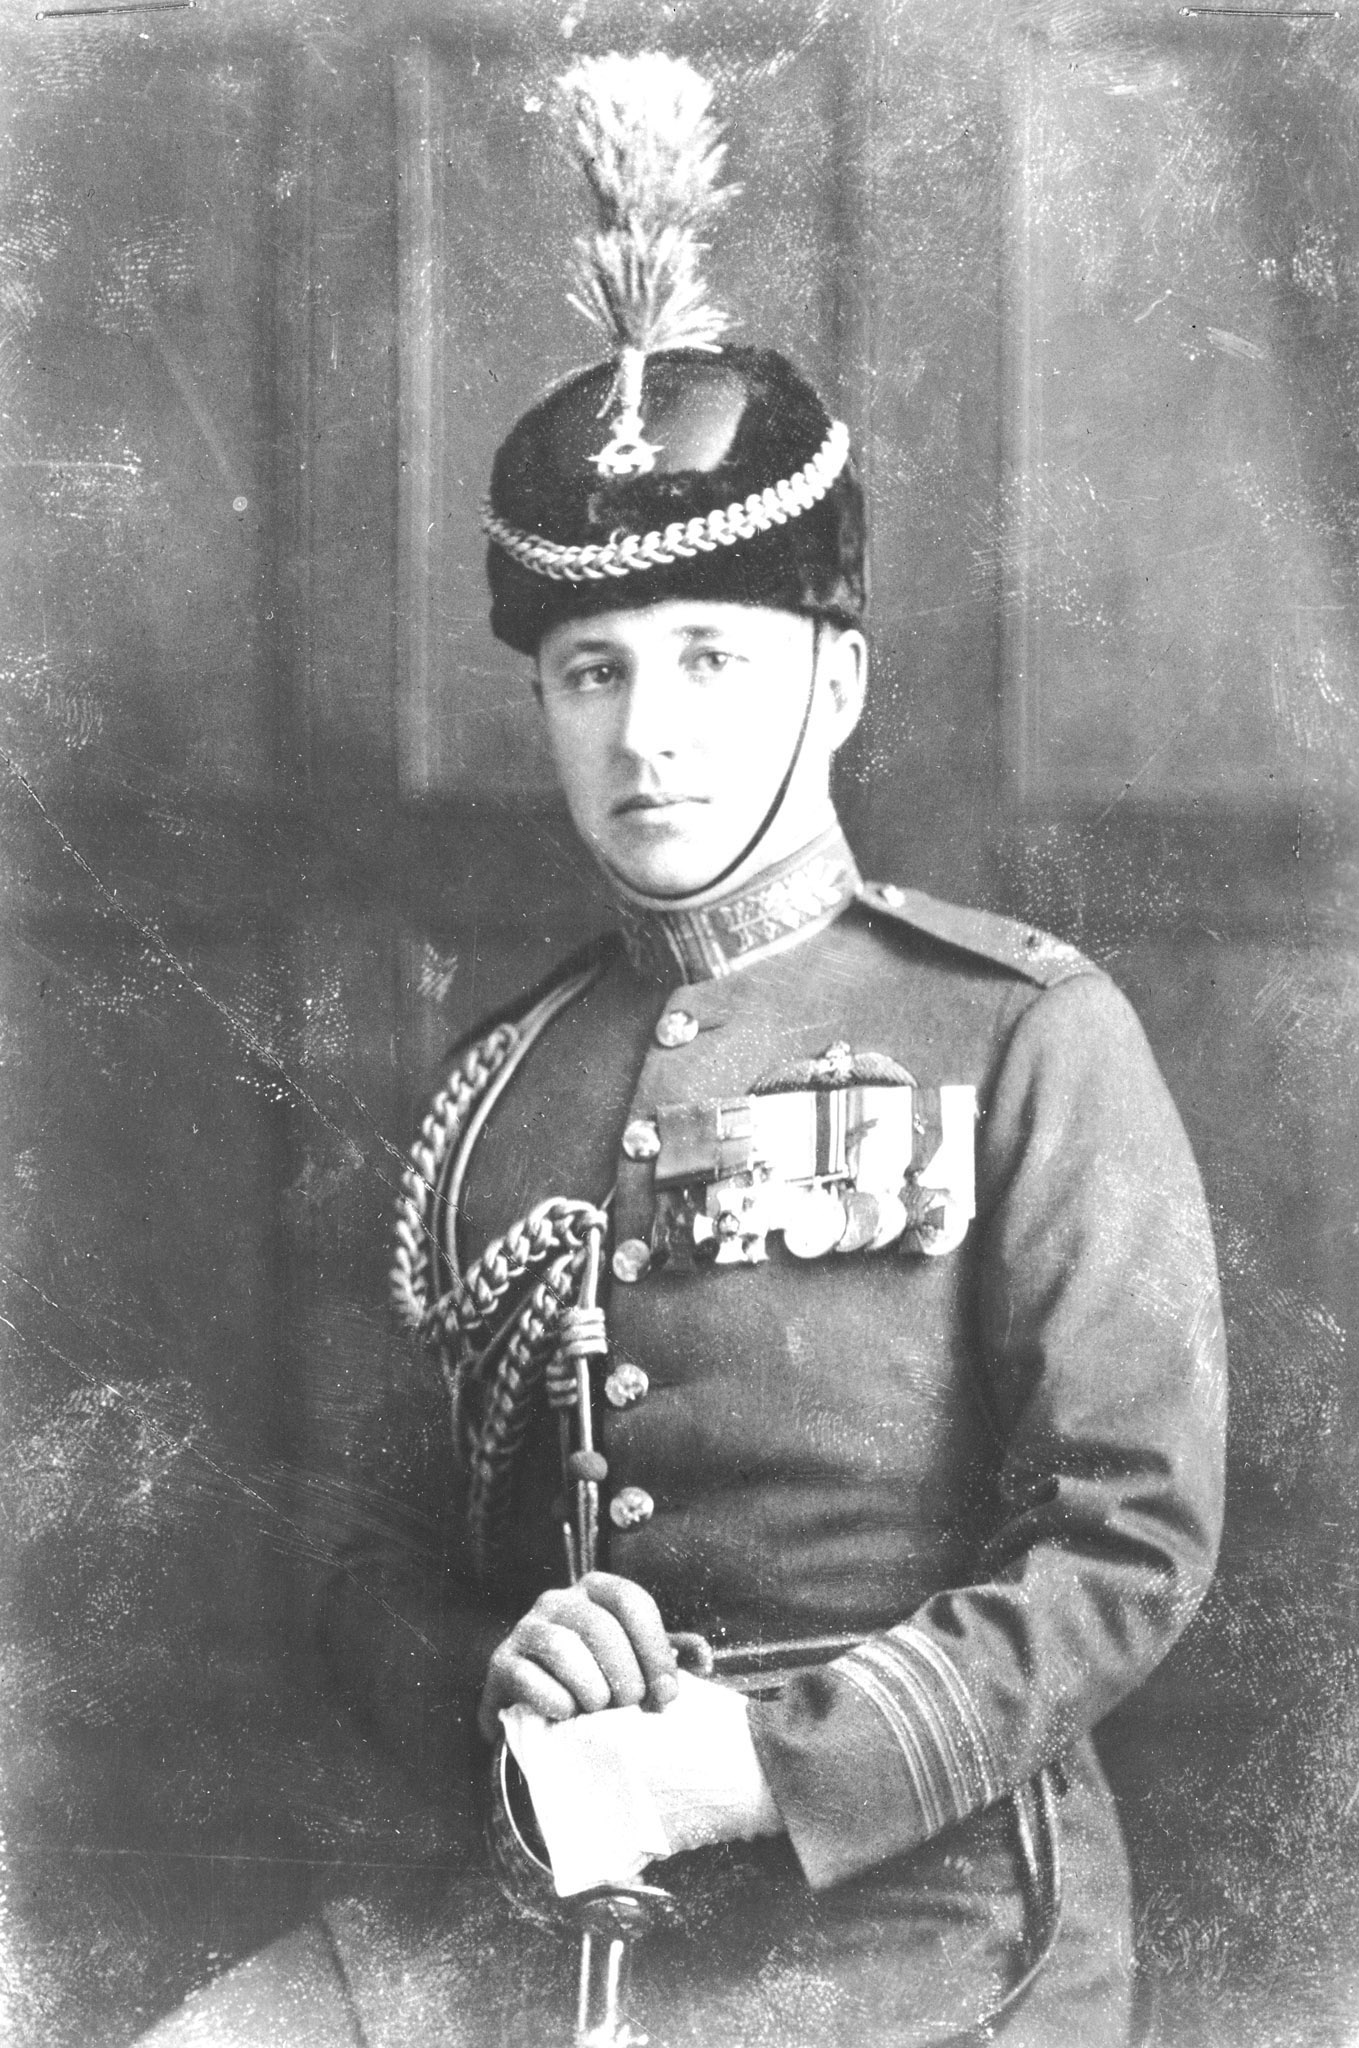 Wing Commander William G. Barker, the first director of the newly-created Royal Canadian Air Force, held the post from April 1, 1924, to May 18, 1924. In this photo, taken around 1925, he wears the dress uniform of the RCAF. PHOTO: DND Archives, RE64-236